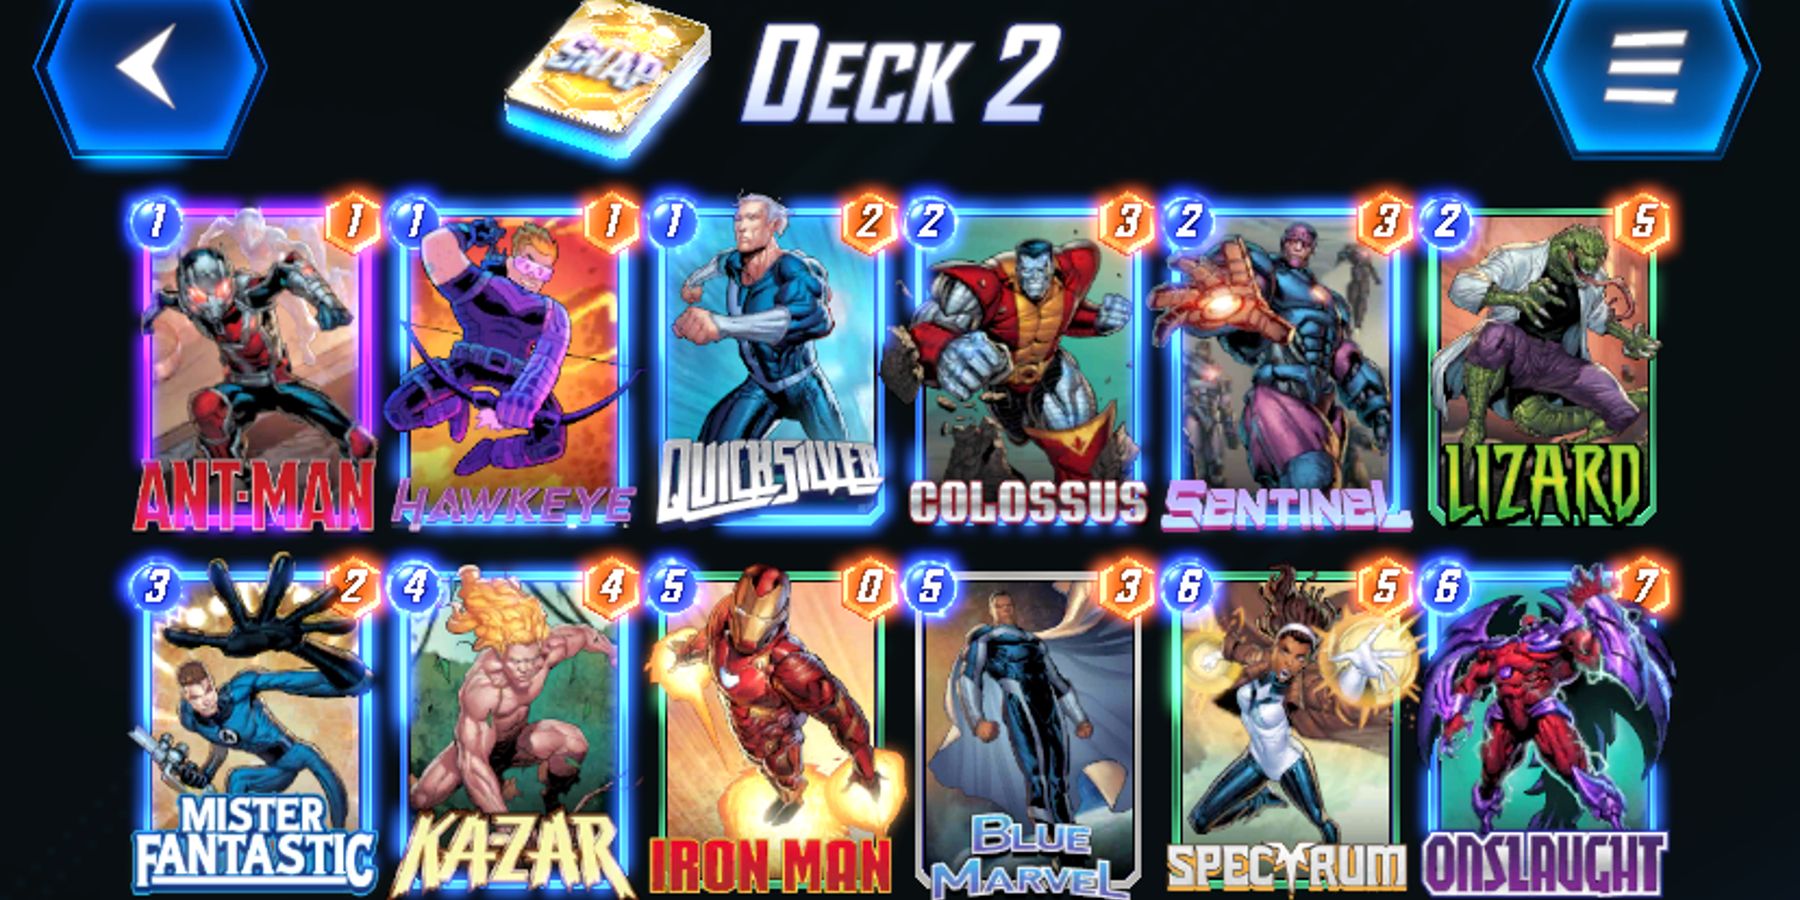 How to Build Your First MARVEL SNAP Deck